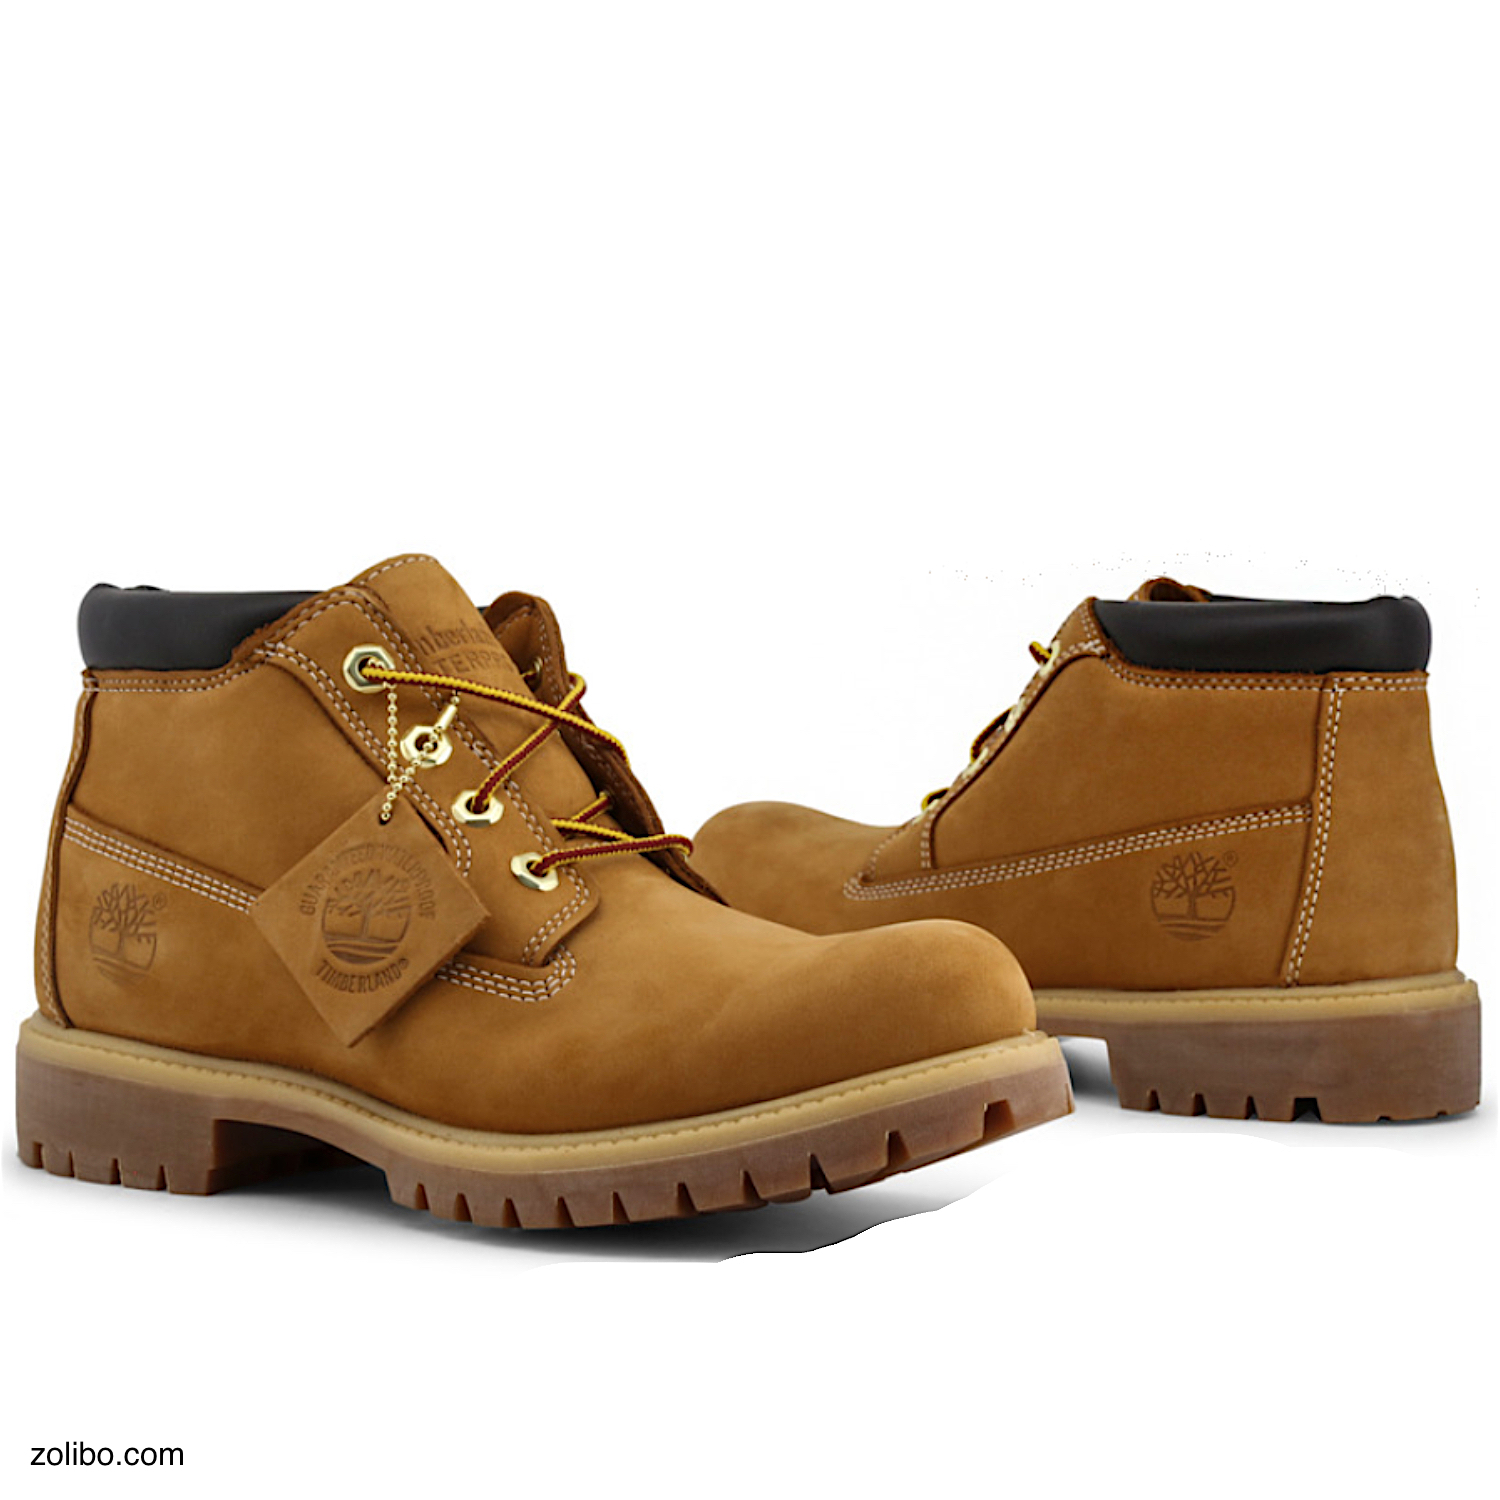 Buy > timberland bottines homme > in stock